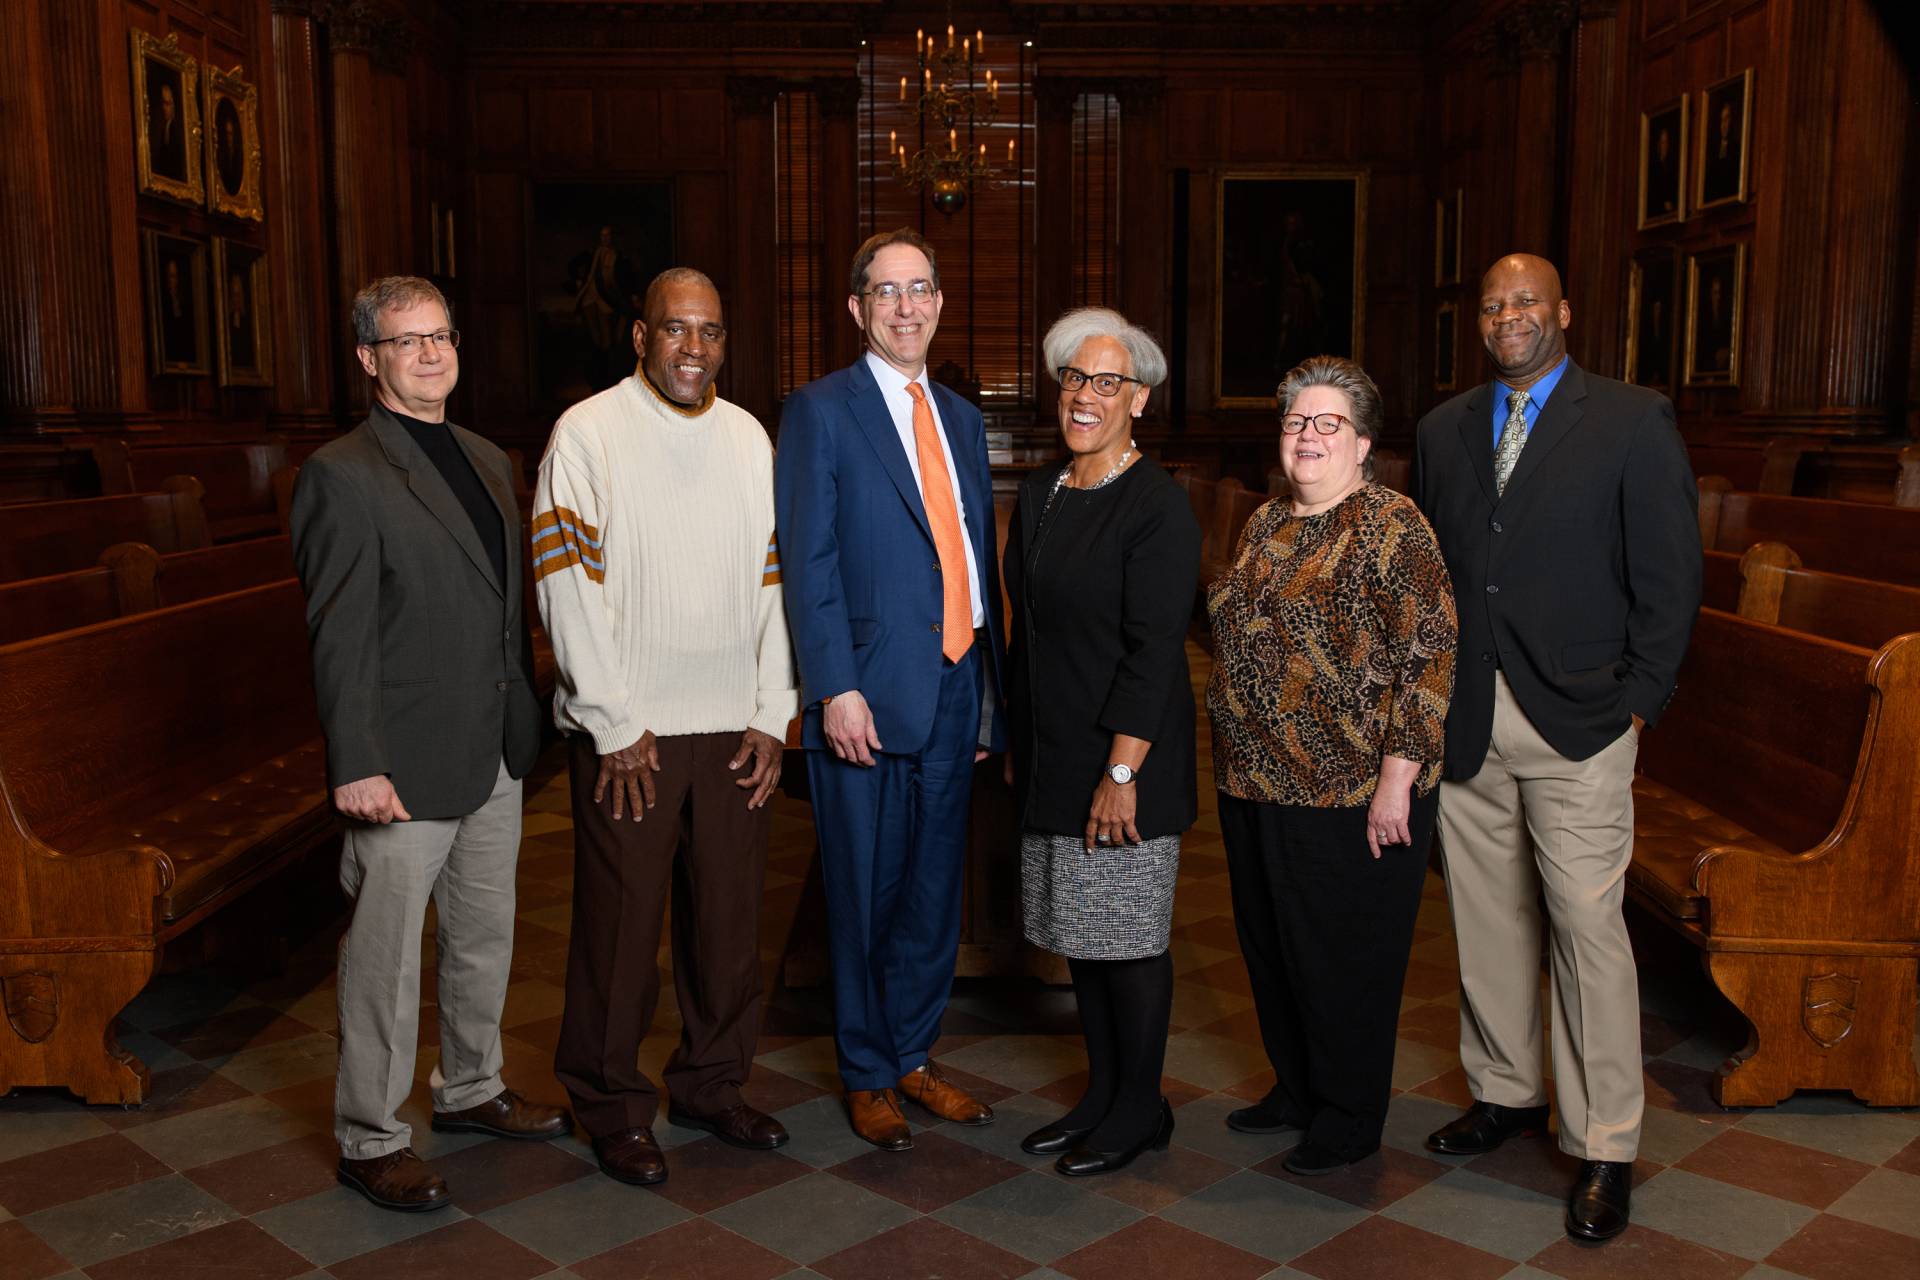 President Eisgruber poses with outstanding staff members honored for their service